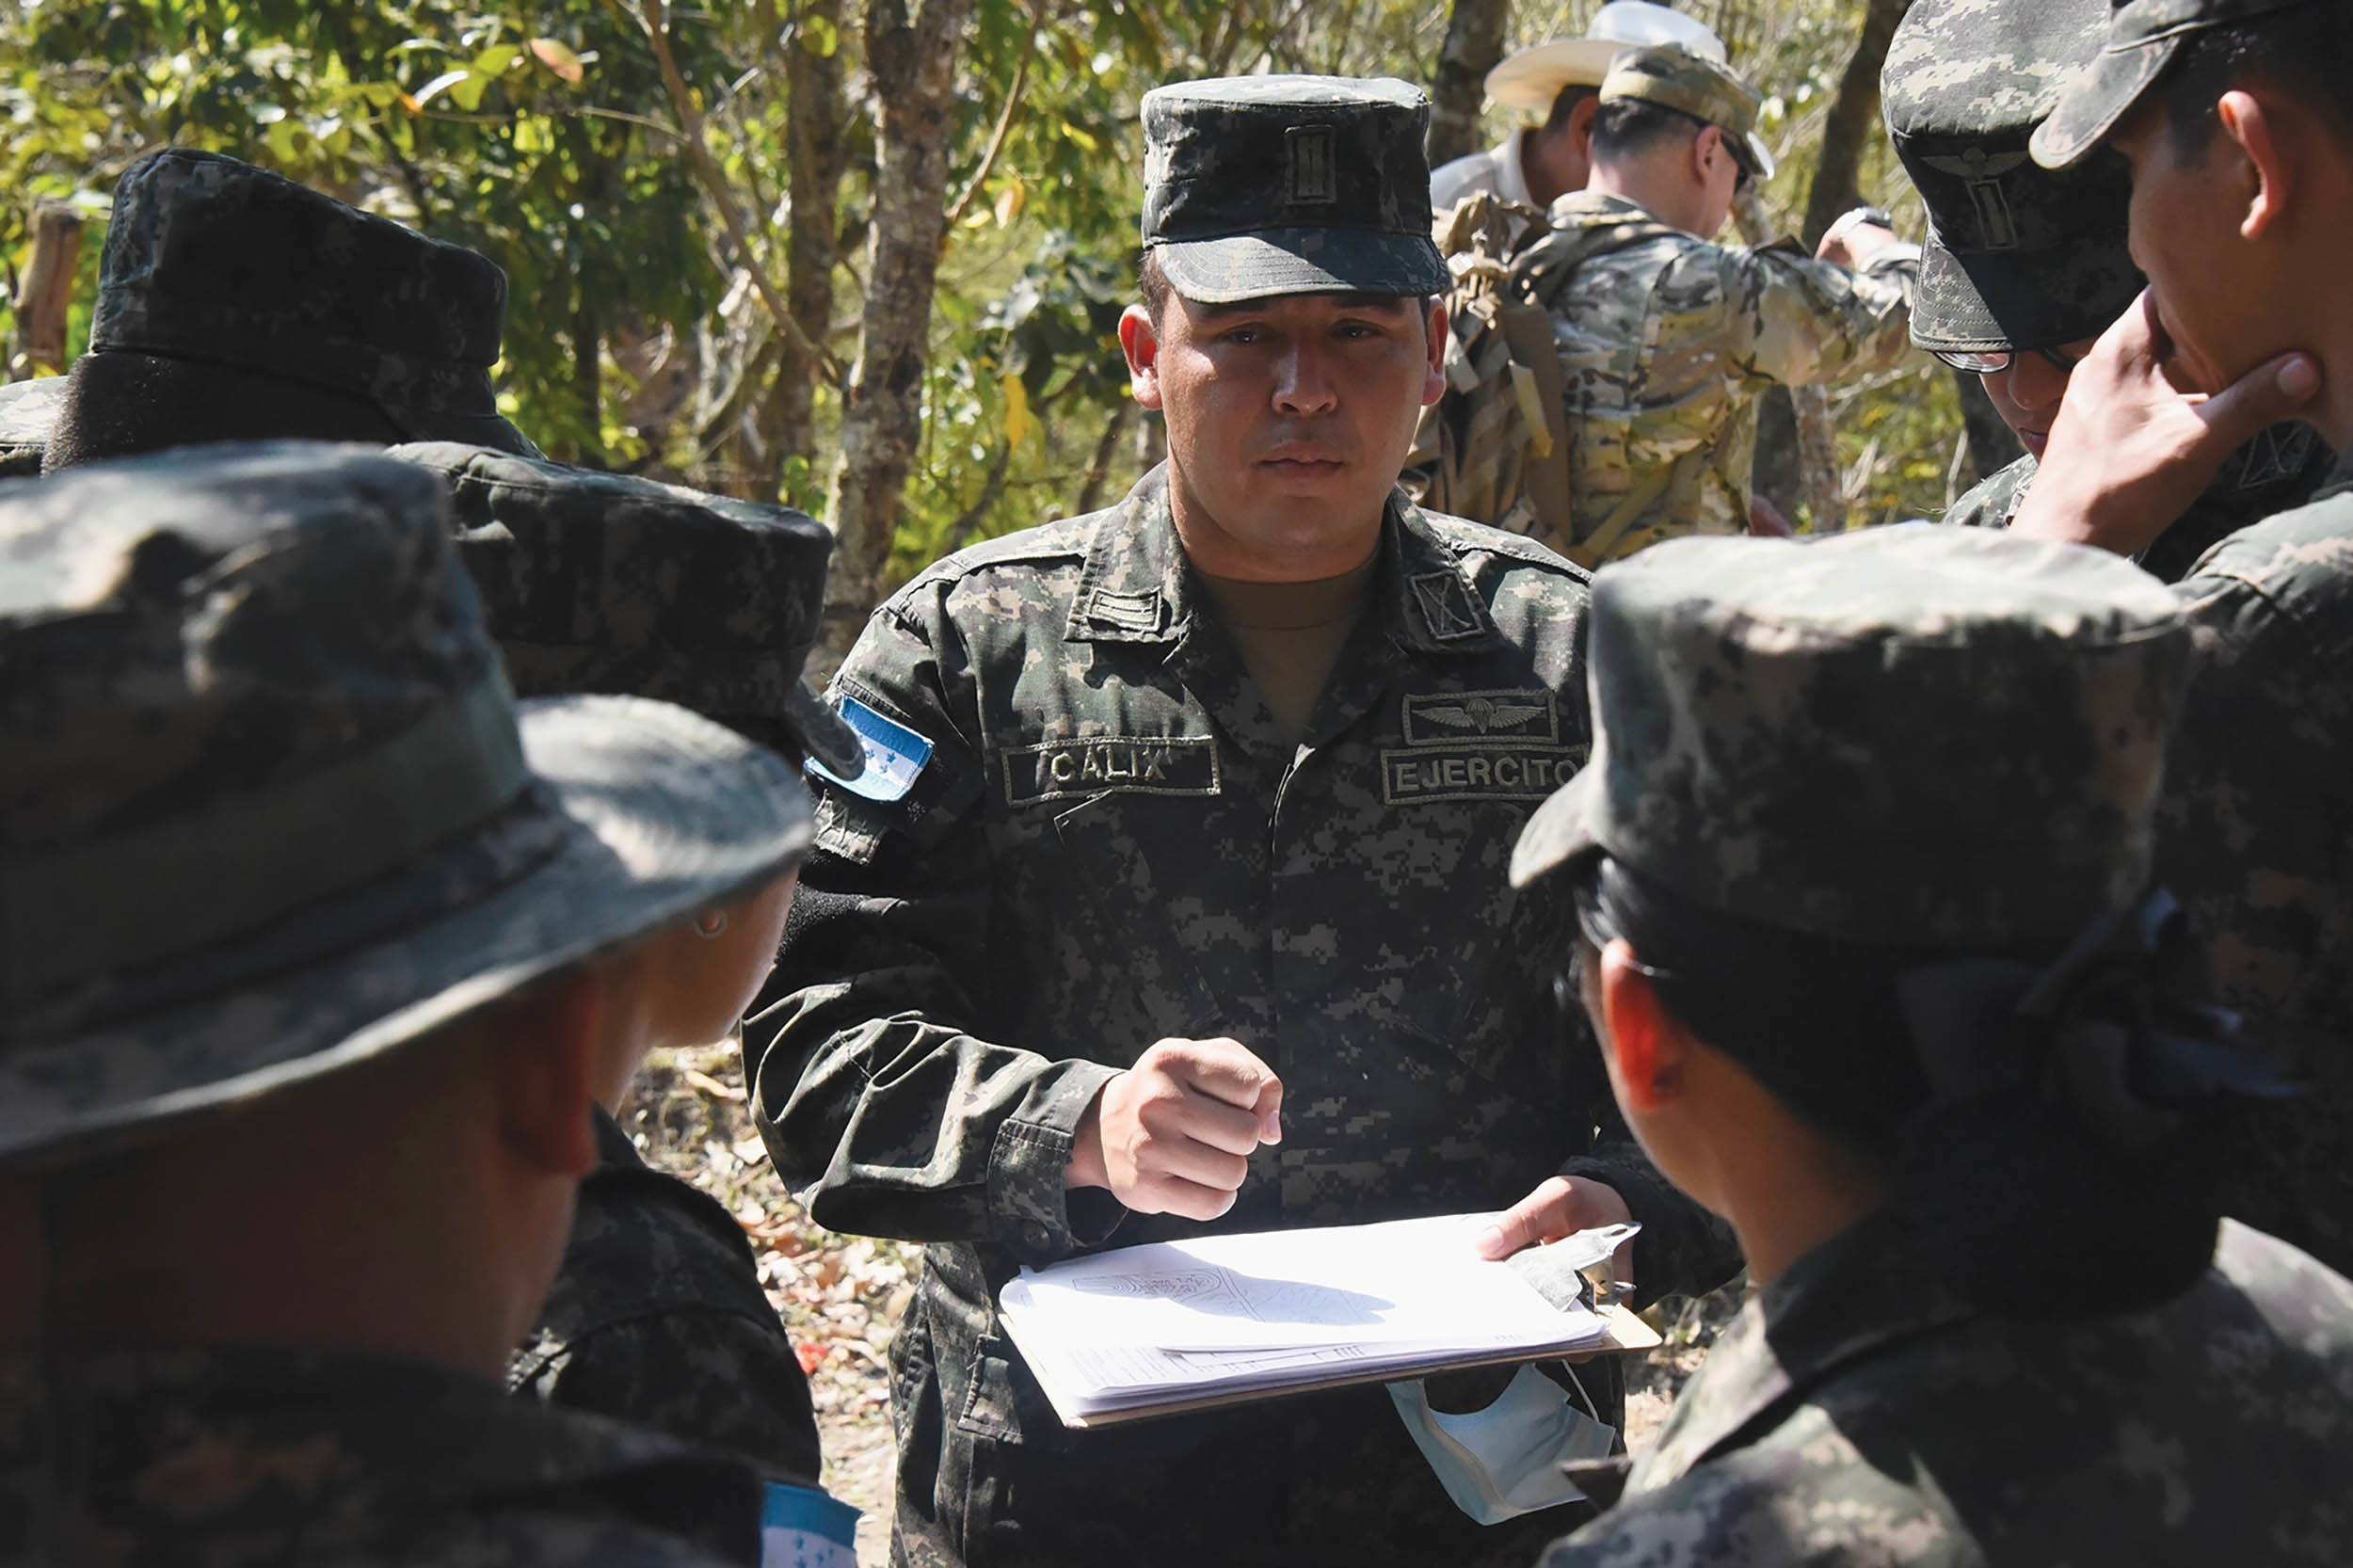 Honduran army Lieutenant prepares his team to conduct site assessment at Ostuman during cultural heritage protection exchange with U.S. military experts